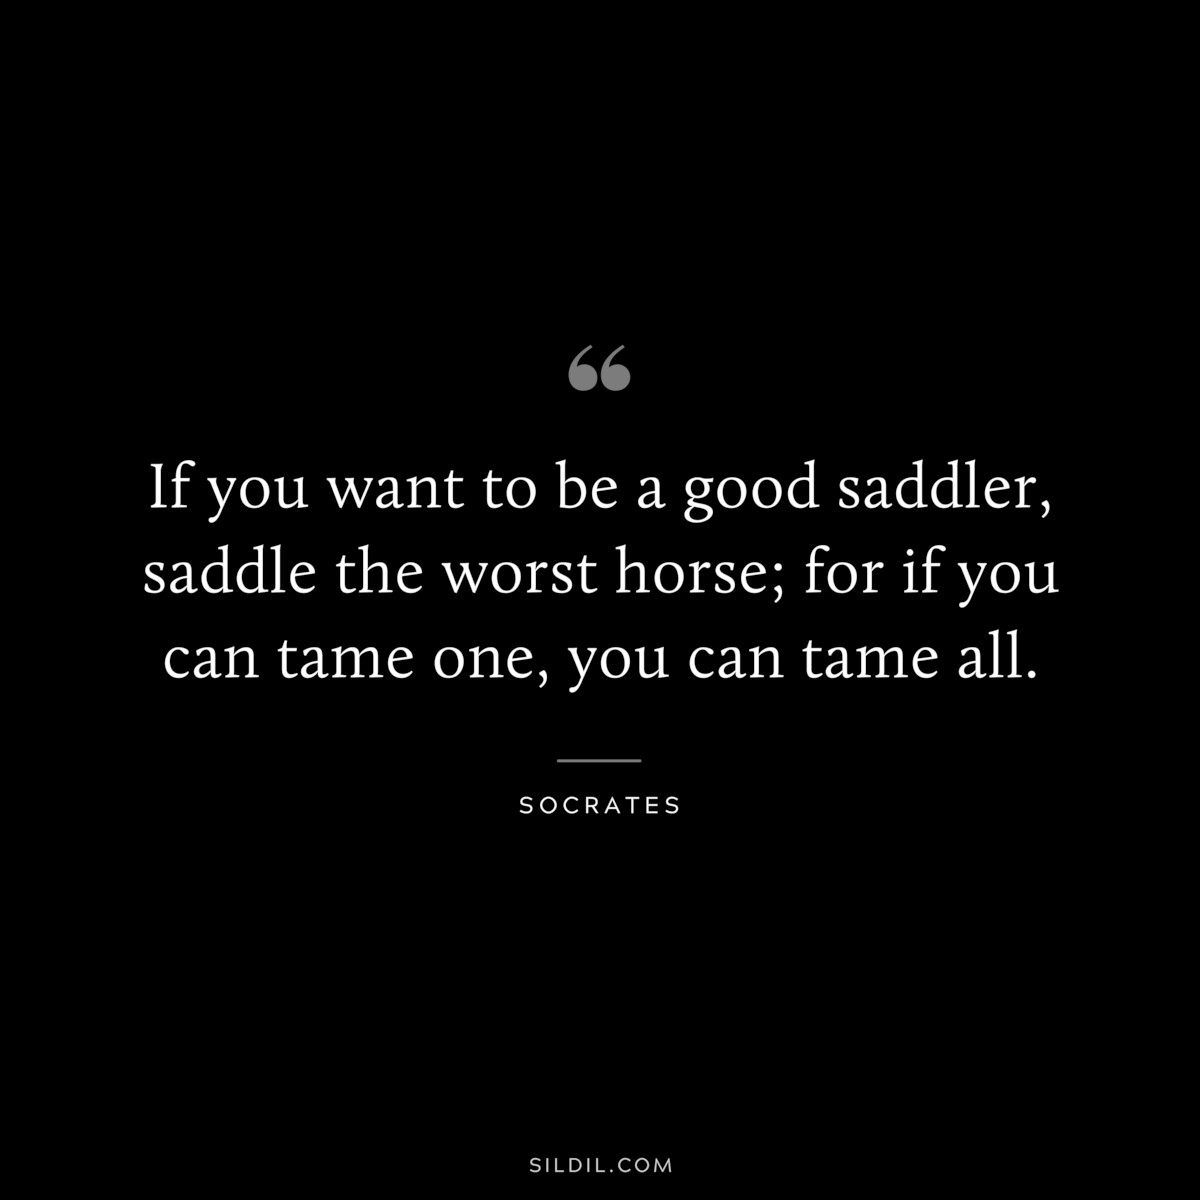 If you want to be a good saddler, saddle the worst horse; for if you can tame one, you can tame all. ― Socrates